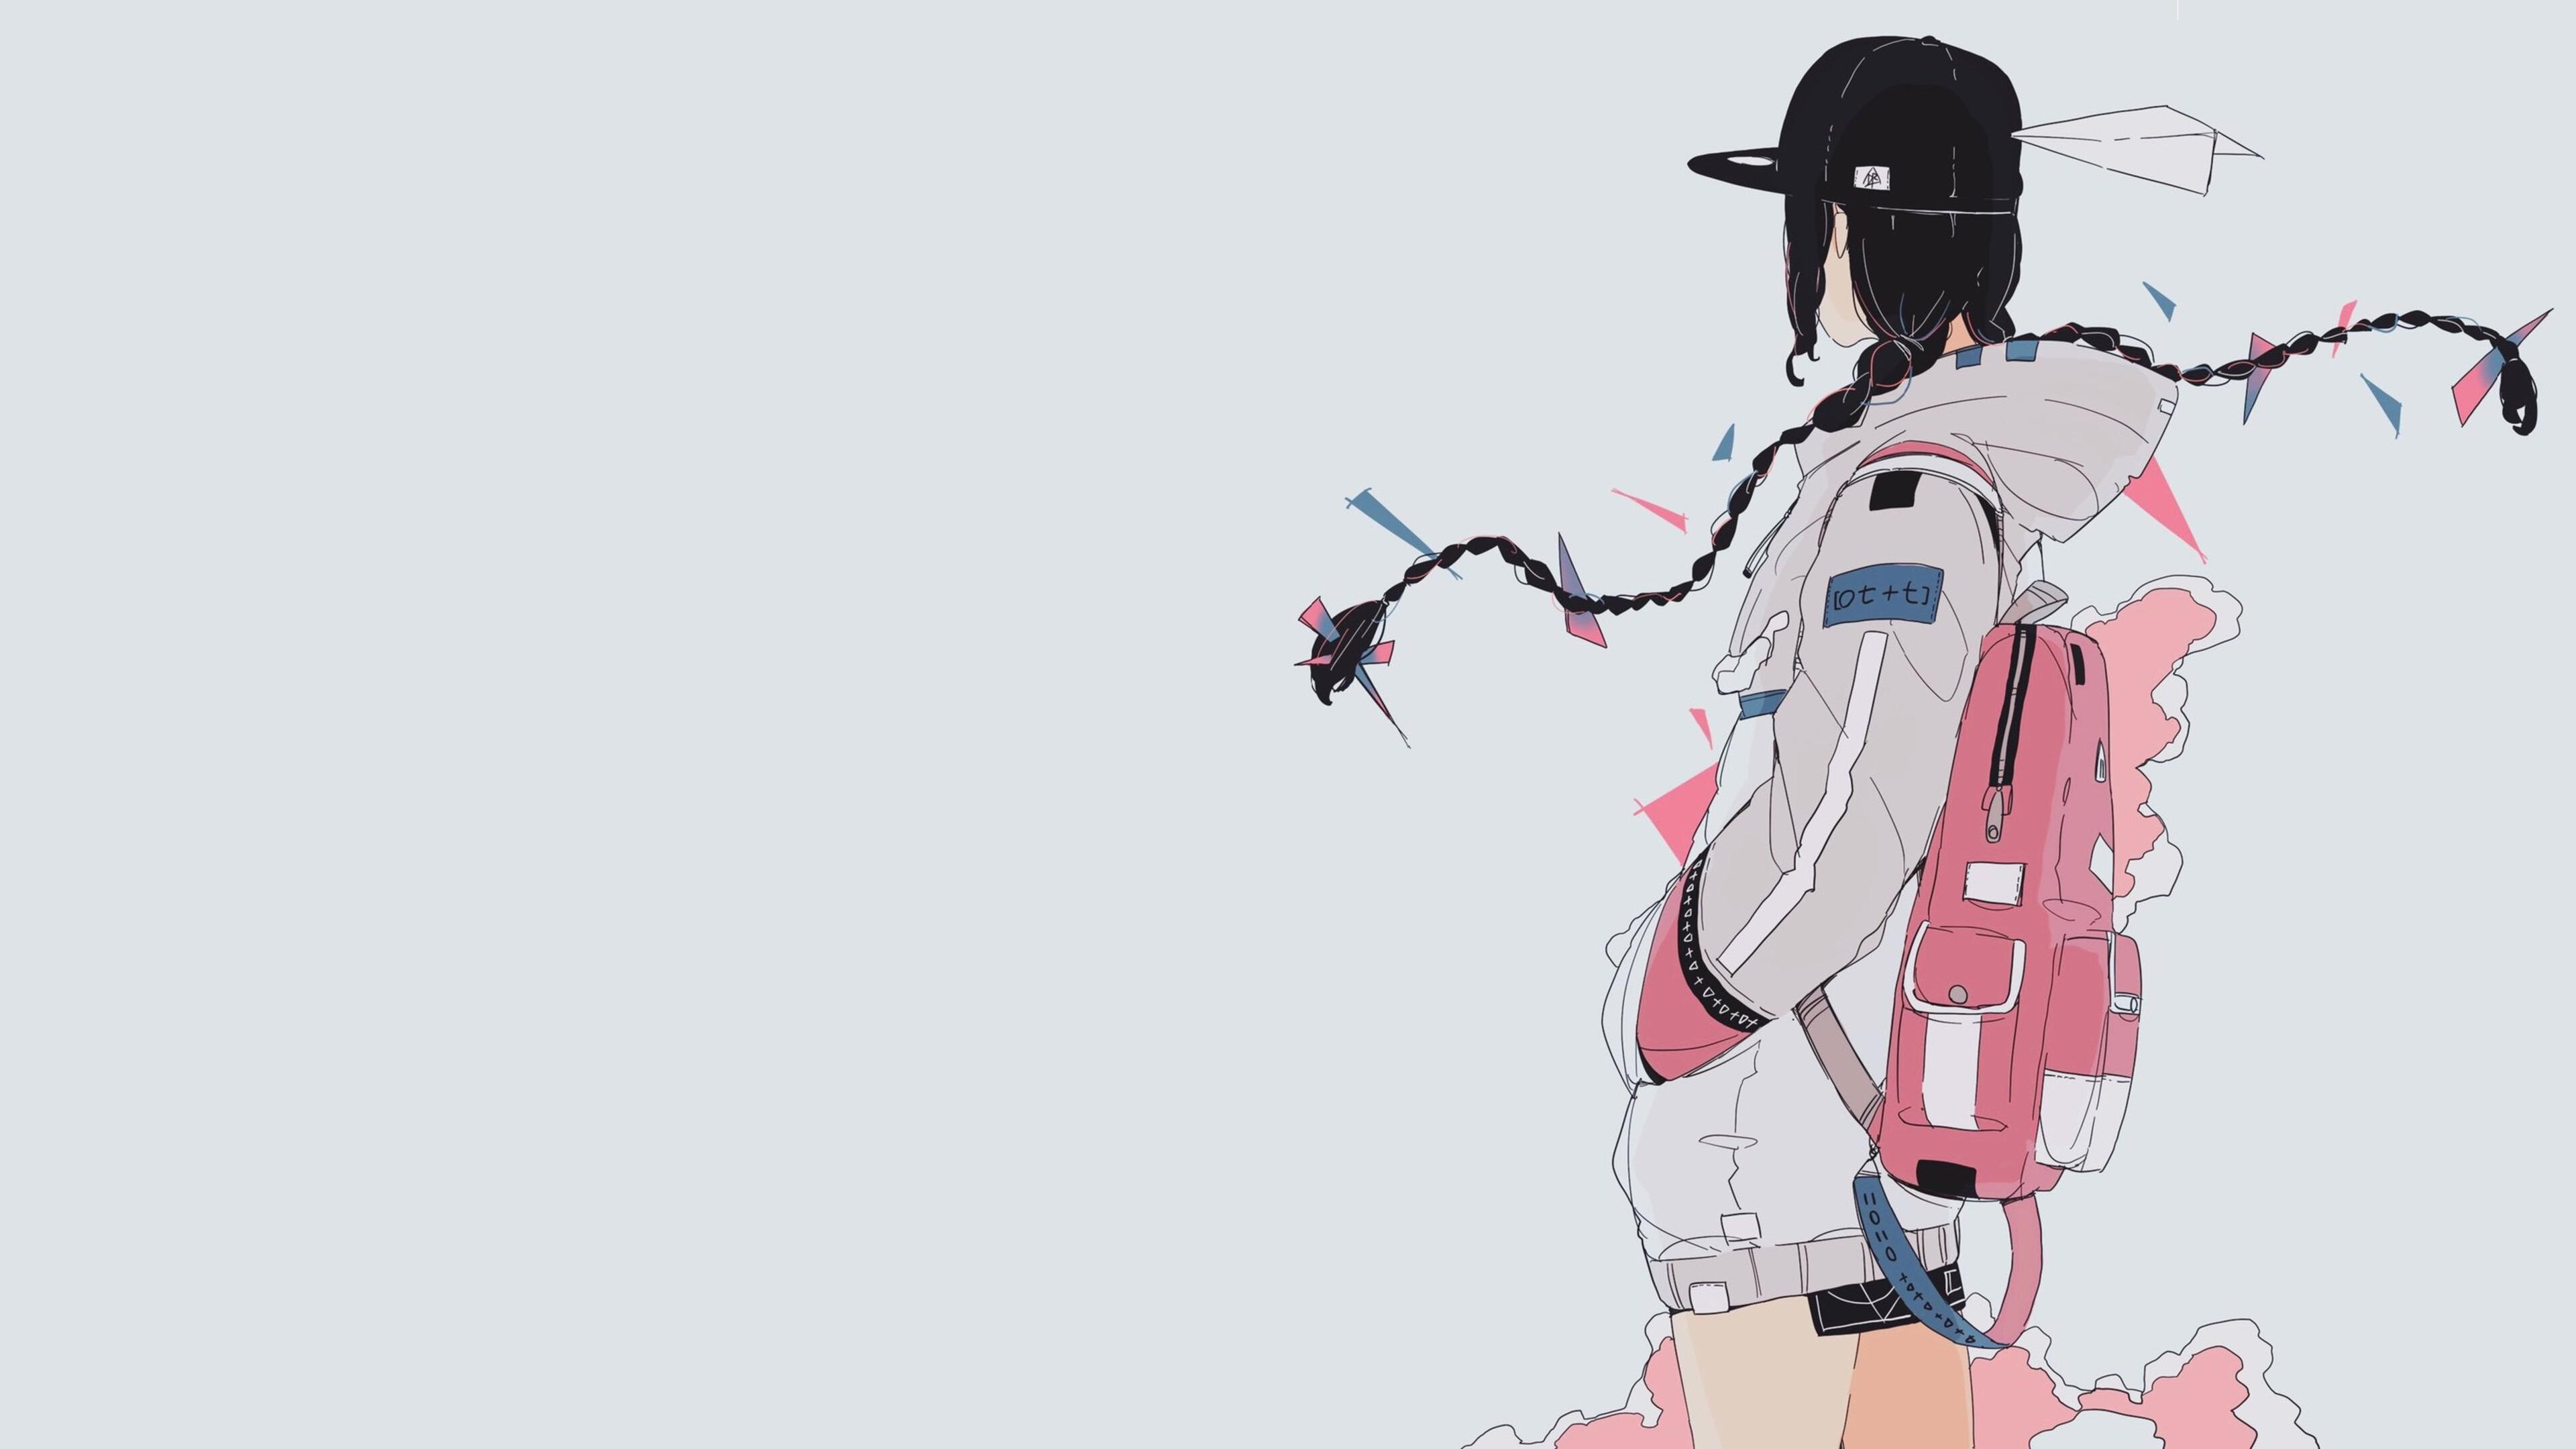 Anime 3840x2160 daisukerichard anime girls original characters hat white background backpacks minimalism simple background looking away hands in pockets braids twintails paperplanes